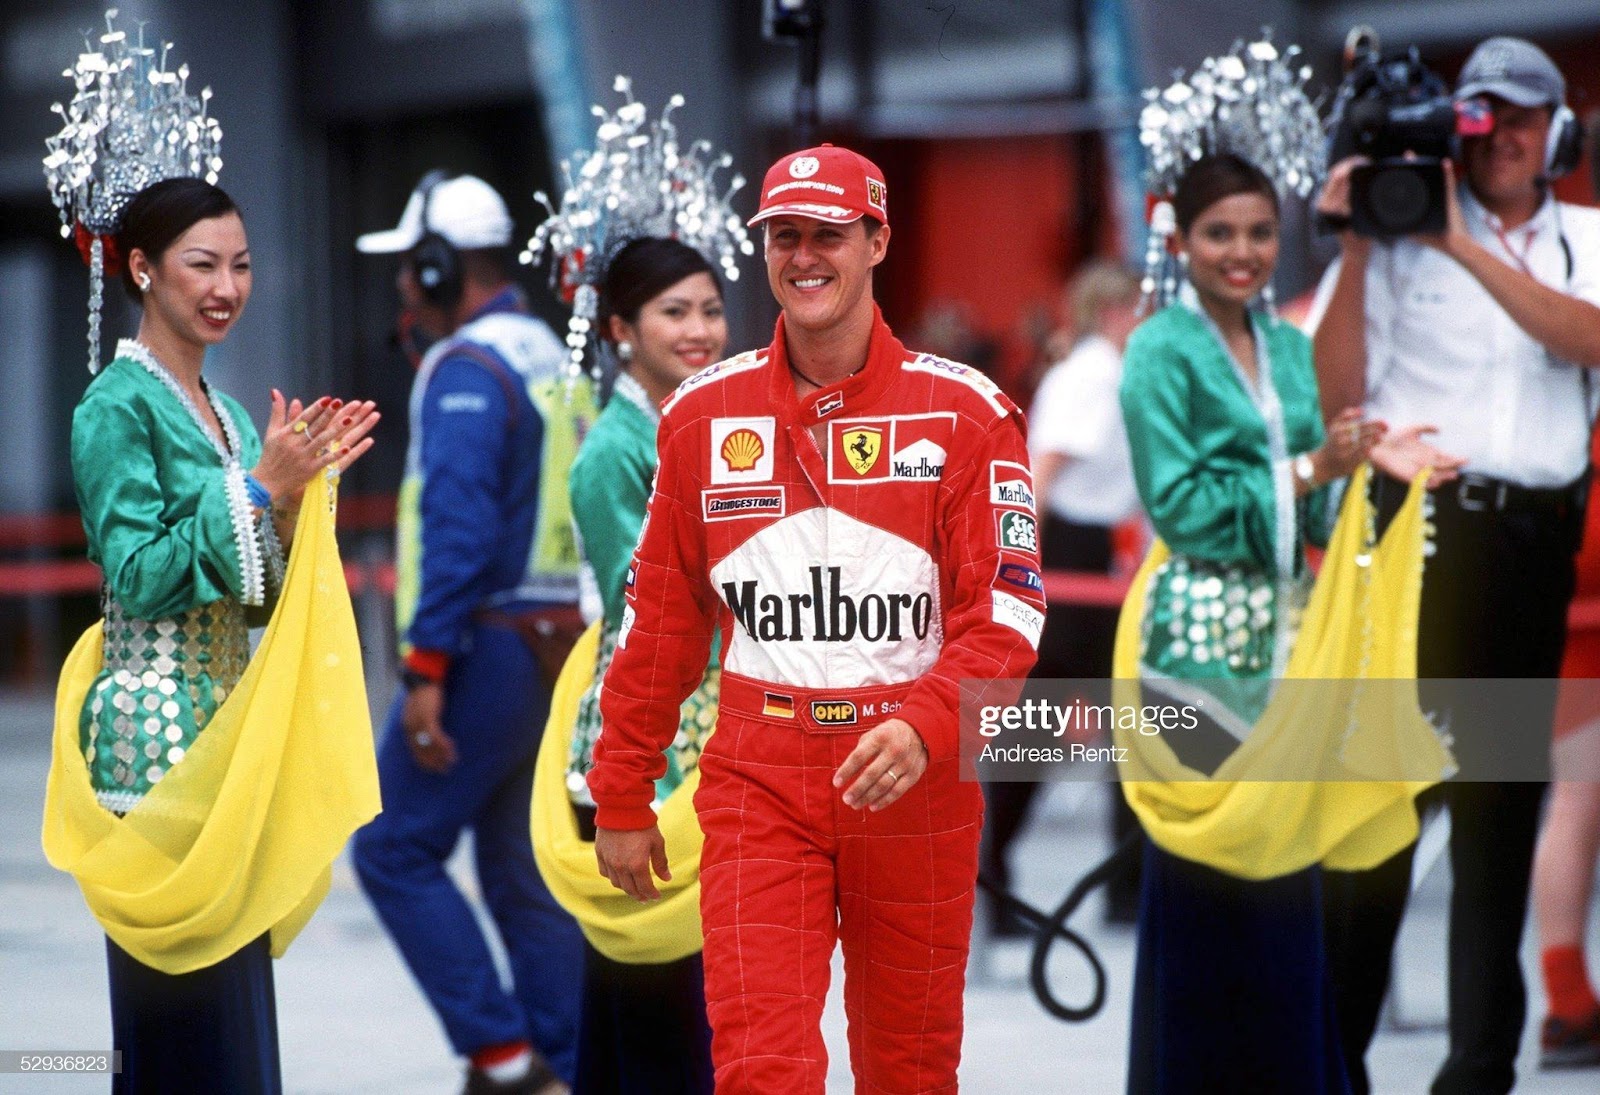 Michael Schumacher at the Malaysian Grand Prix in Sepang on October 22, 2000.